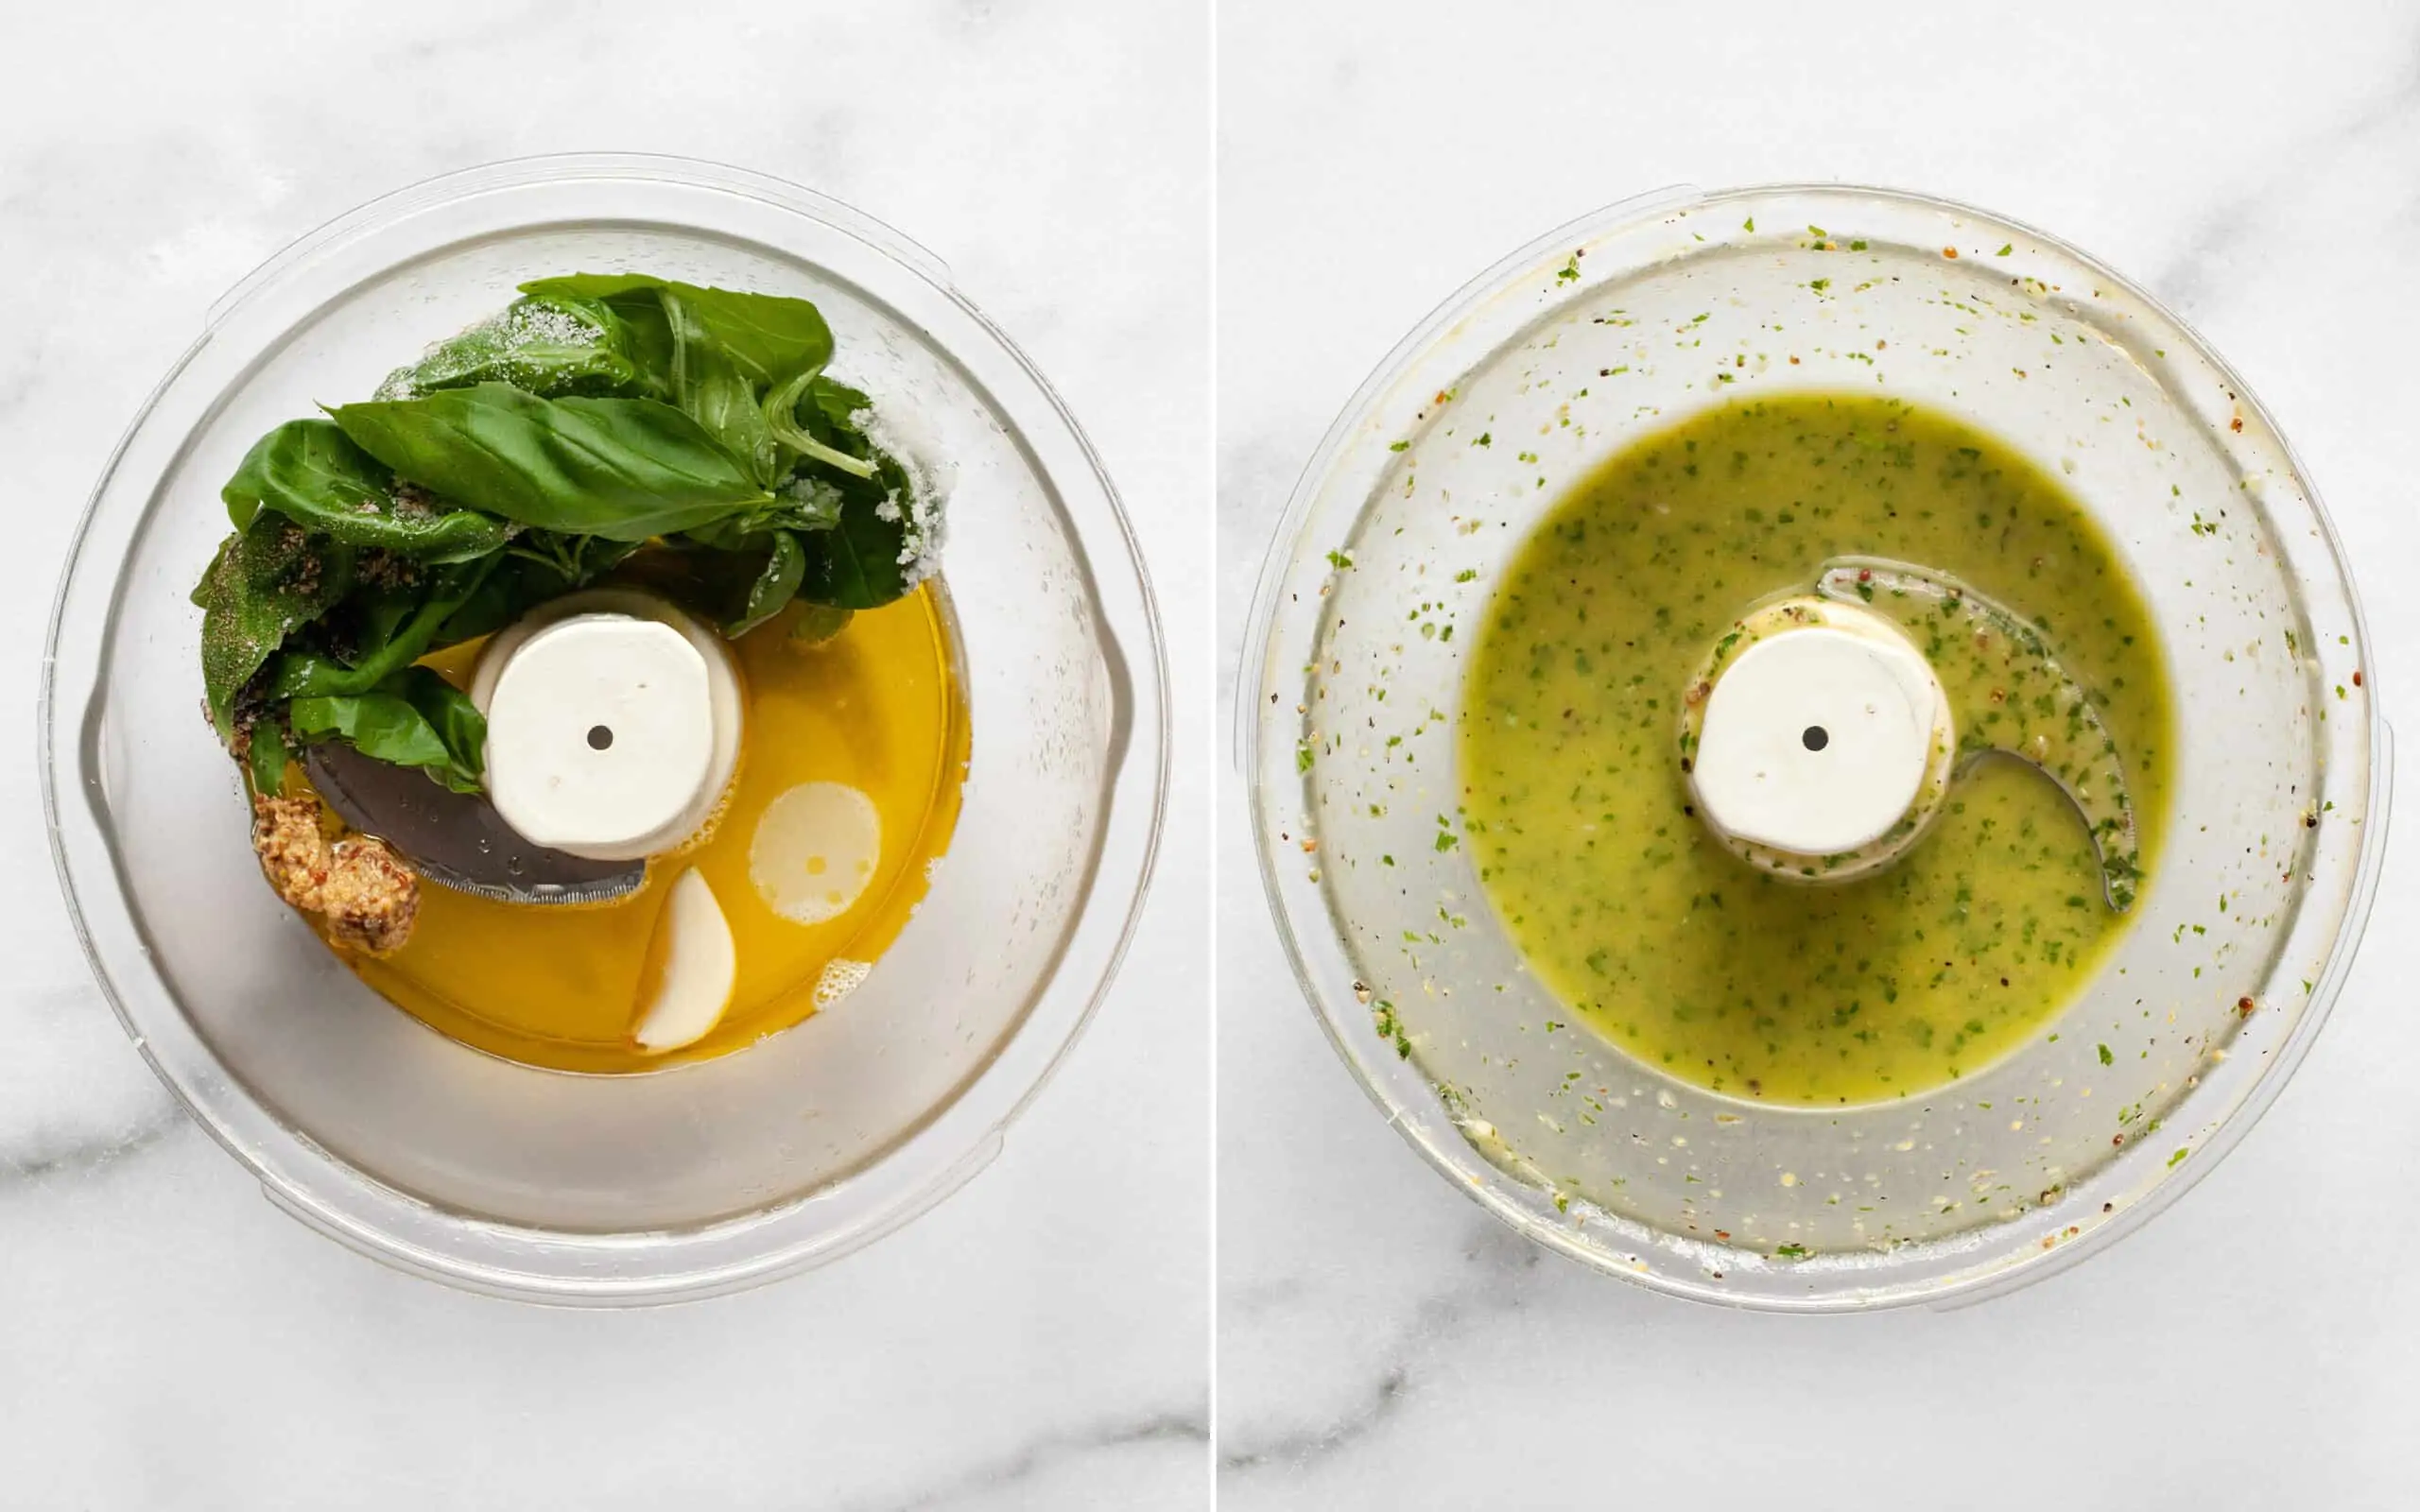 Place the ingredients for the lemon basil vinaigrette into the bowl of a food processor and puree them until smooth.